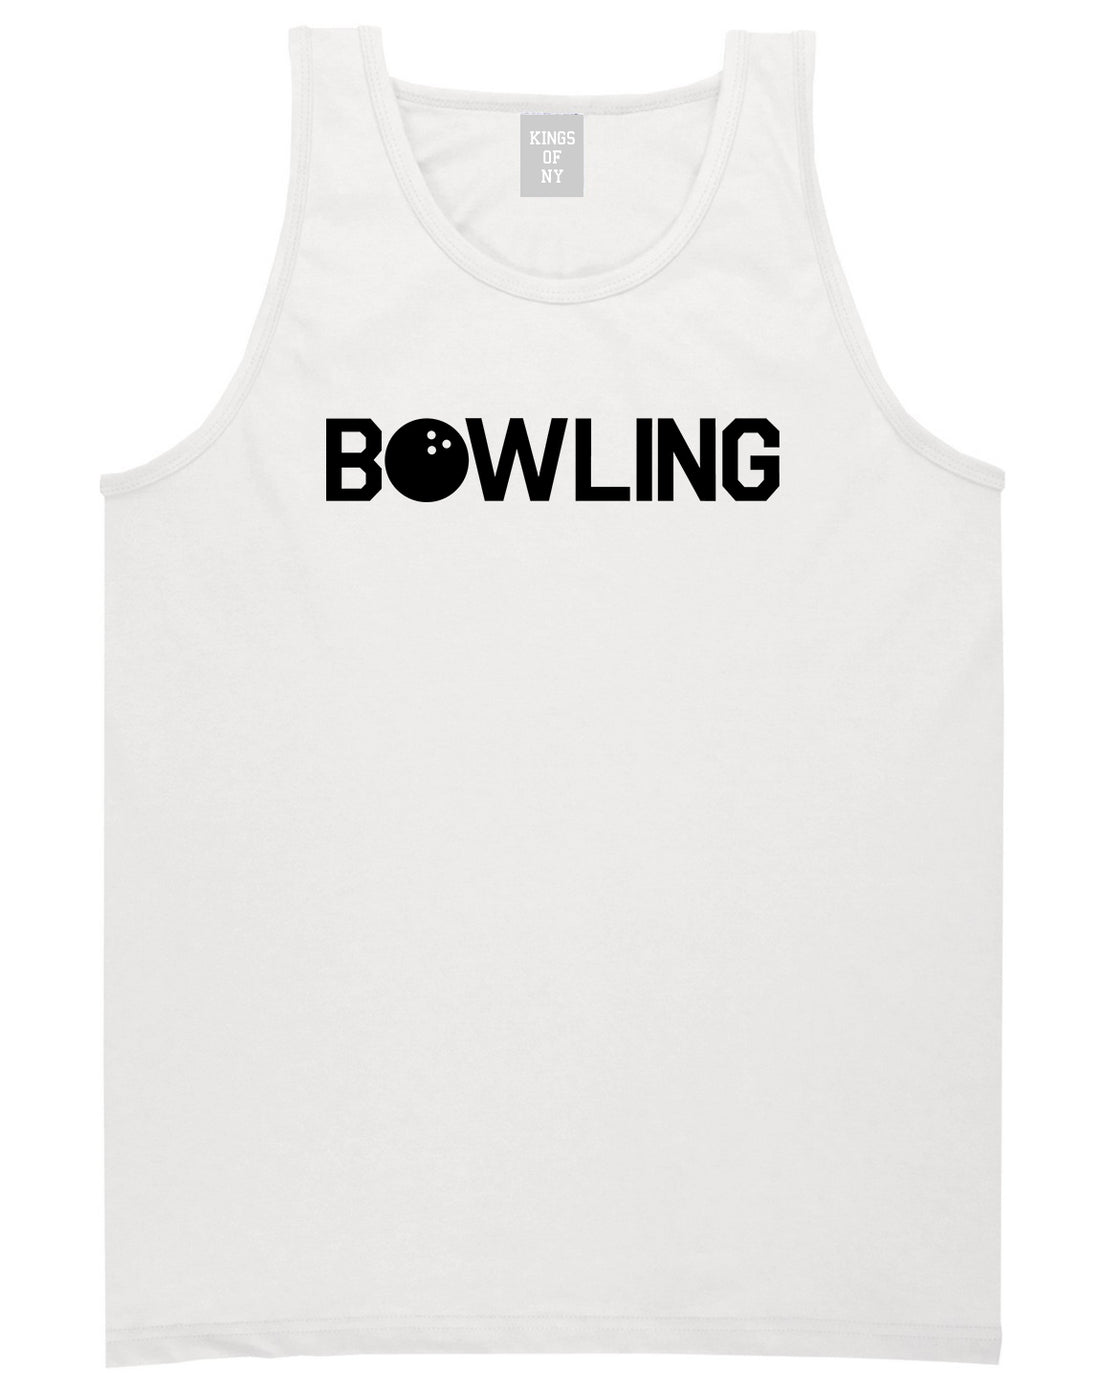 Bowling White Tank Top Shirt by Kings Of NY